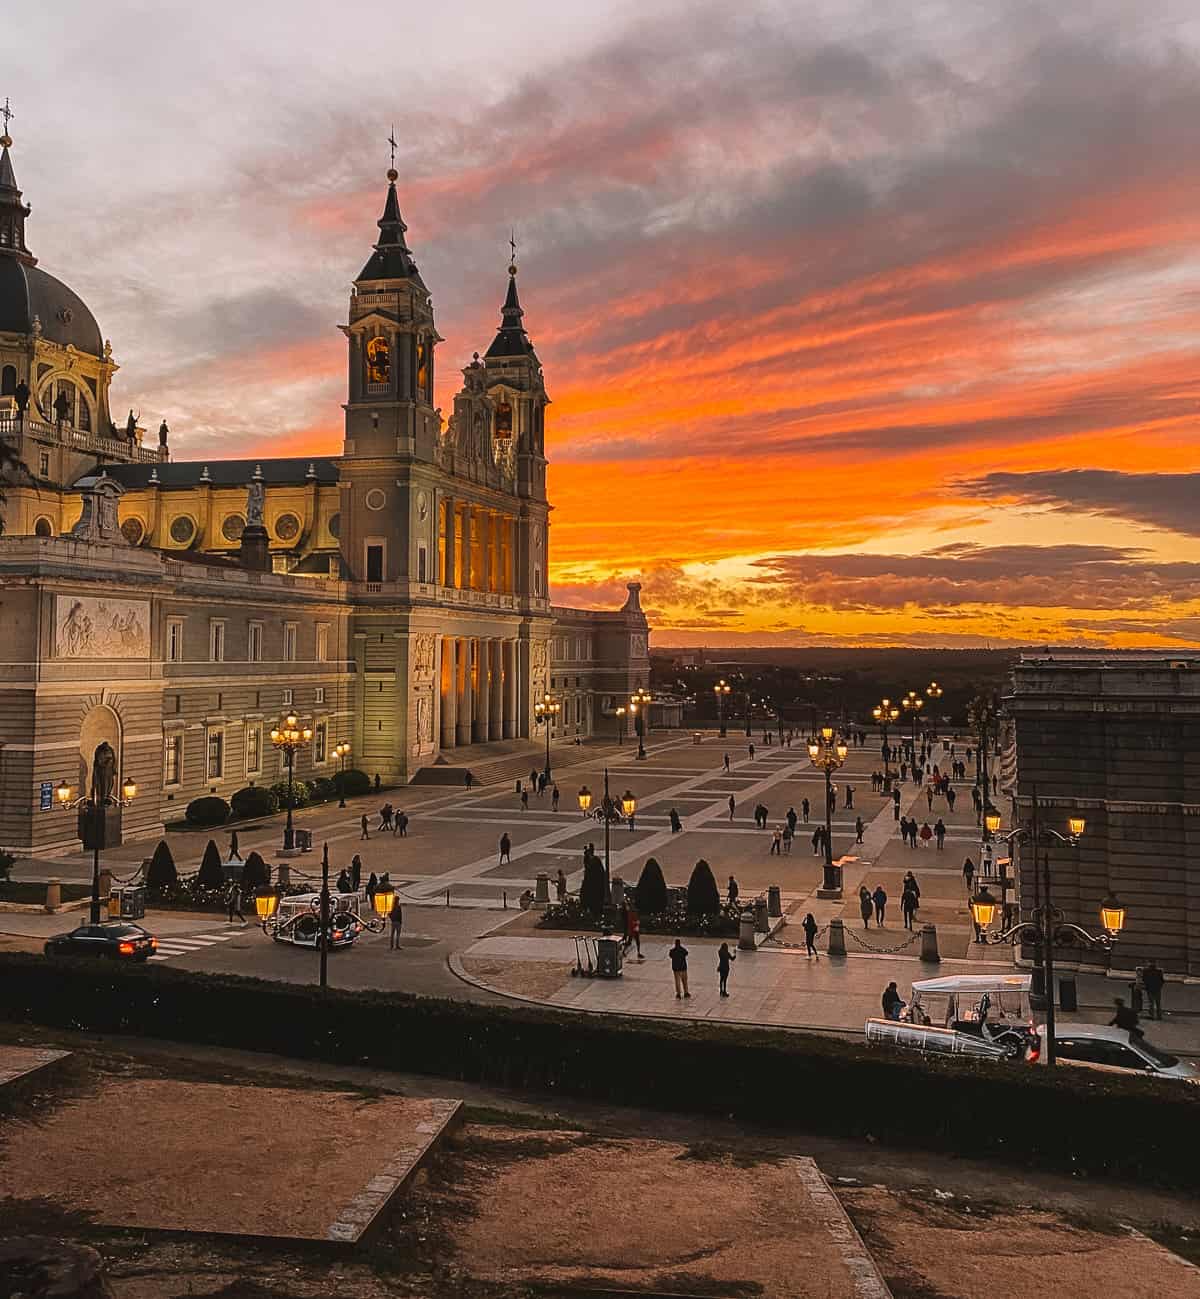 An orange and pink sunset in front of the palace in Madrid